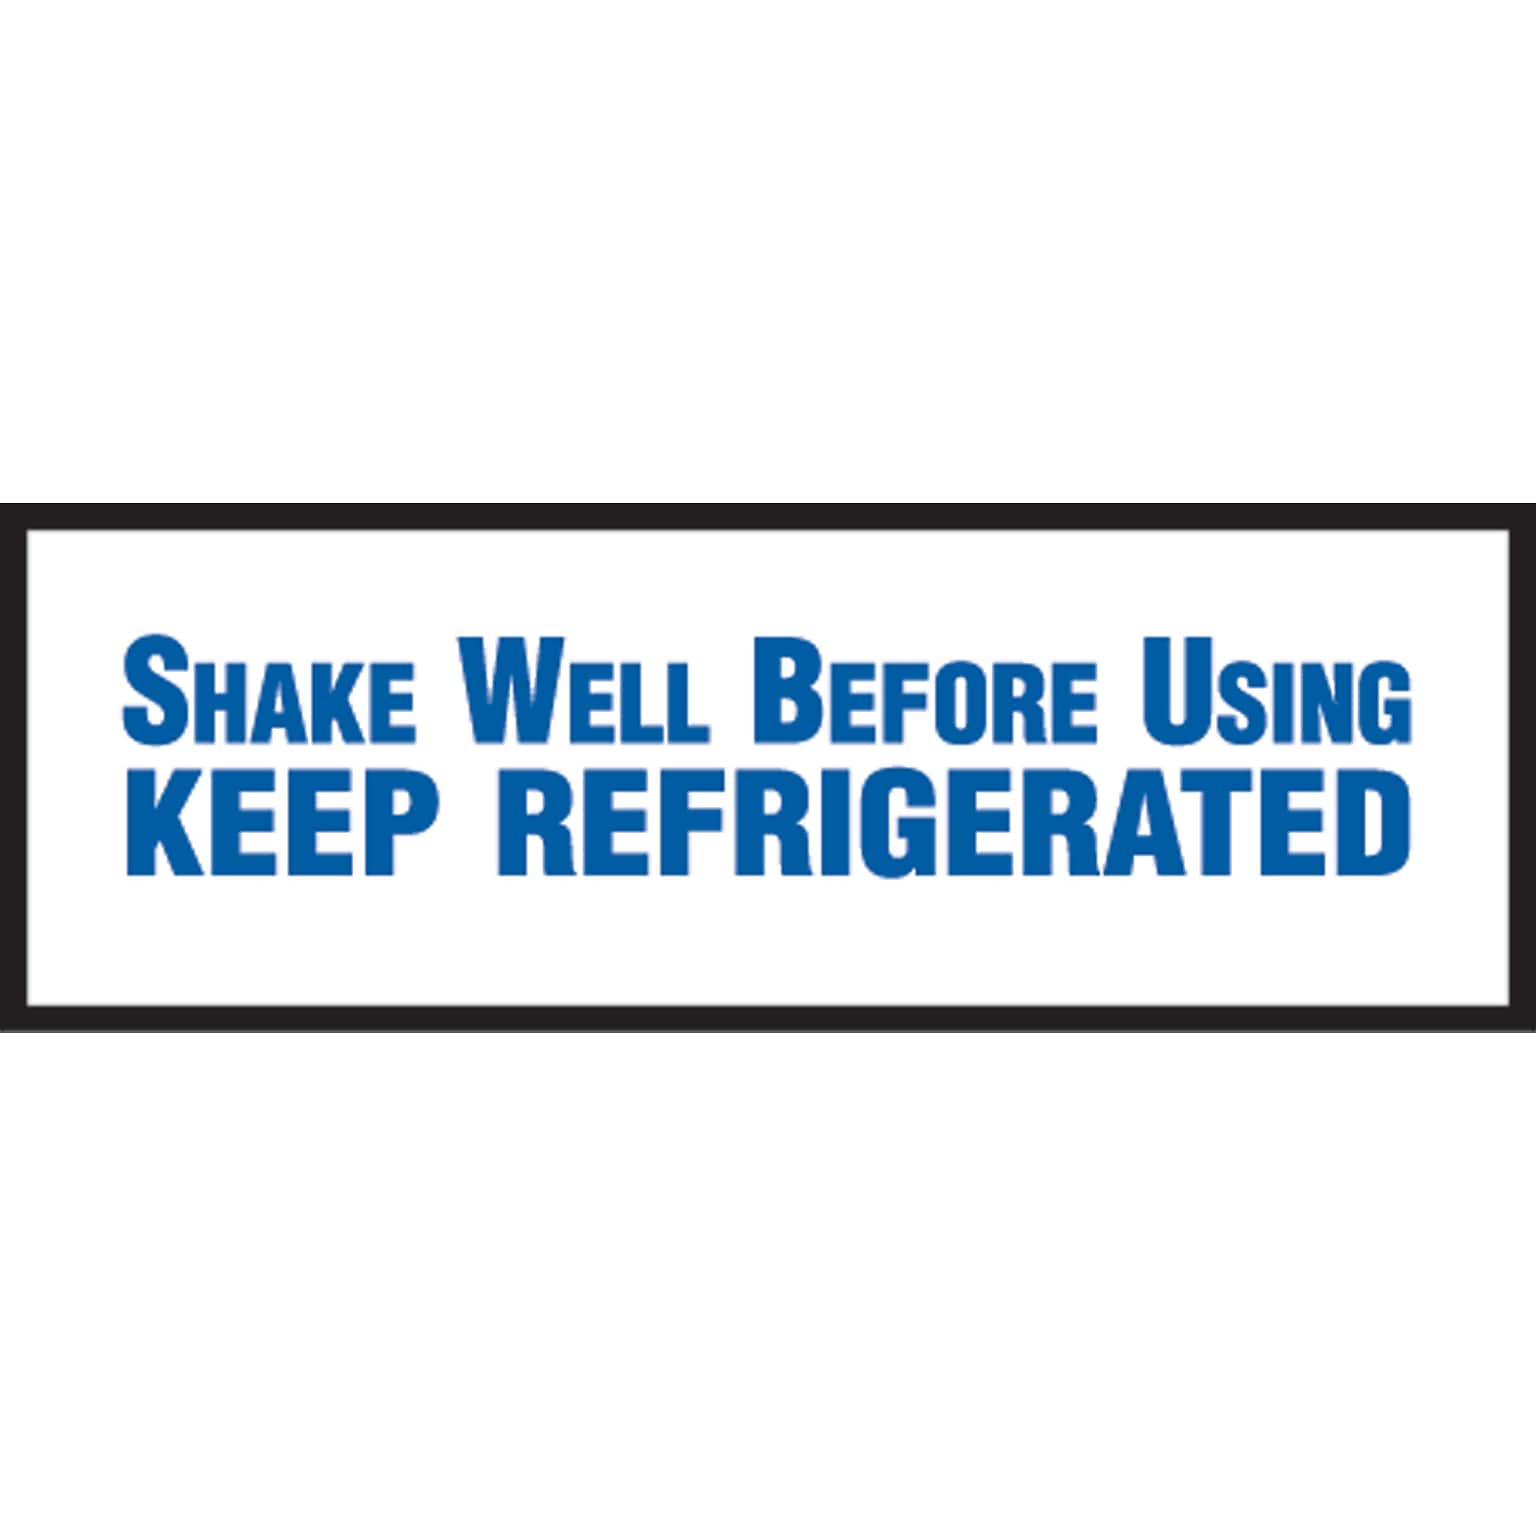 Medical Arts Press® Veterinary Medication Instruction Labels, Shake Well/Keep Refrigerated, White, 1/2x1-1/2, 500 Lbls